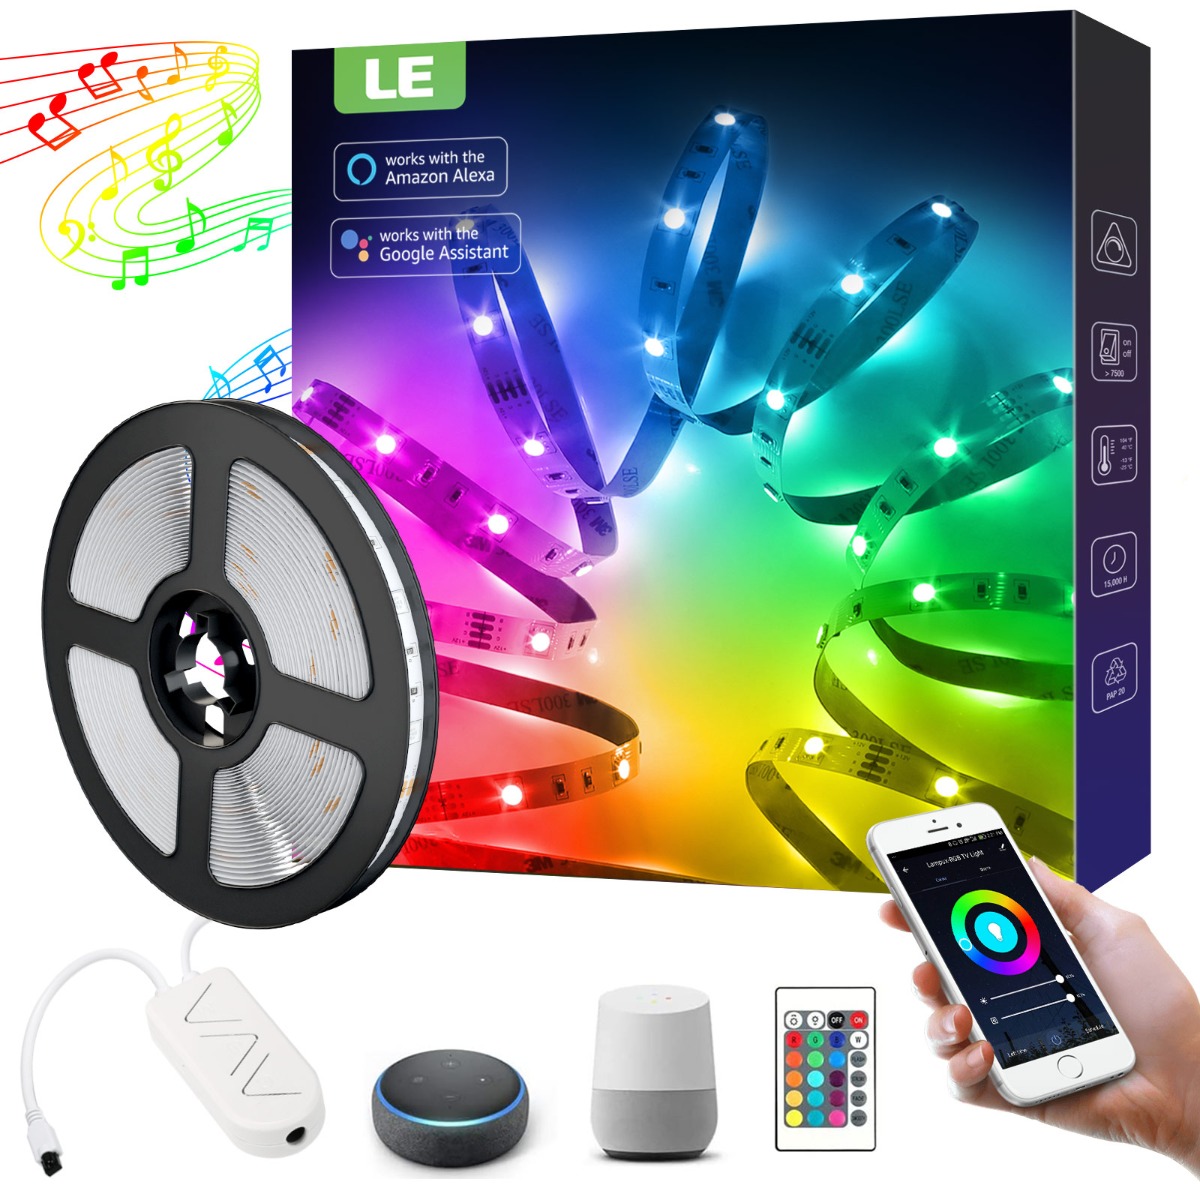 Lepro LED Strip Lights with Remote, Alexa Voice Control, Sync with Music,  App Control, Compatible with Alexa, Google Home, 5m LED Strip Light,  Decoration for House, Wedding Party and More(2.4GHz Only)